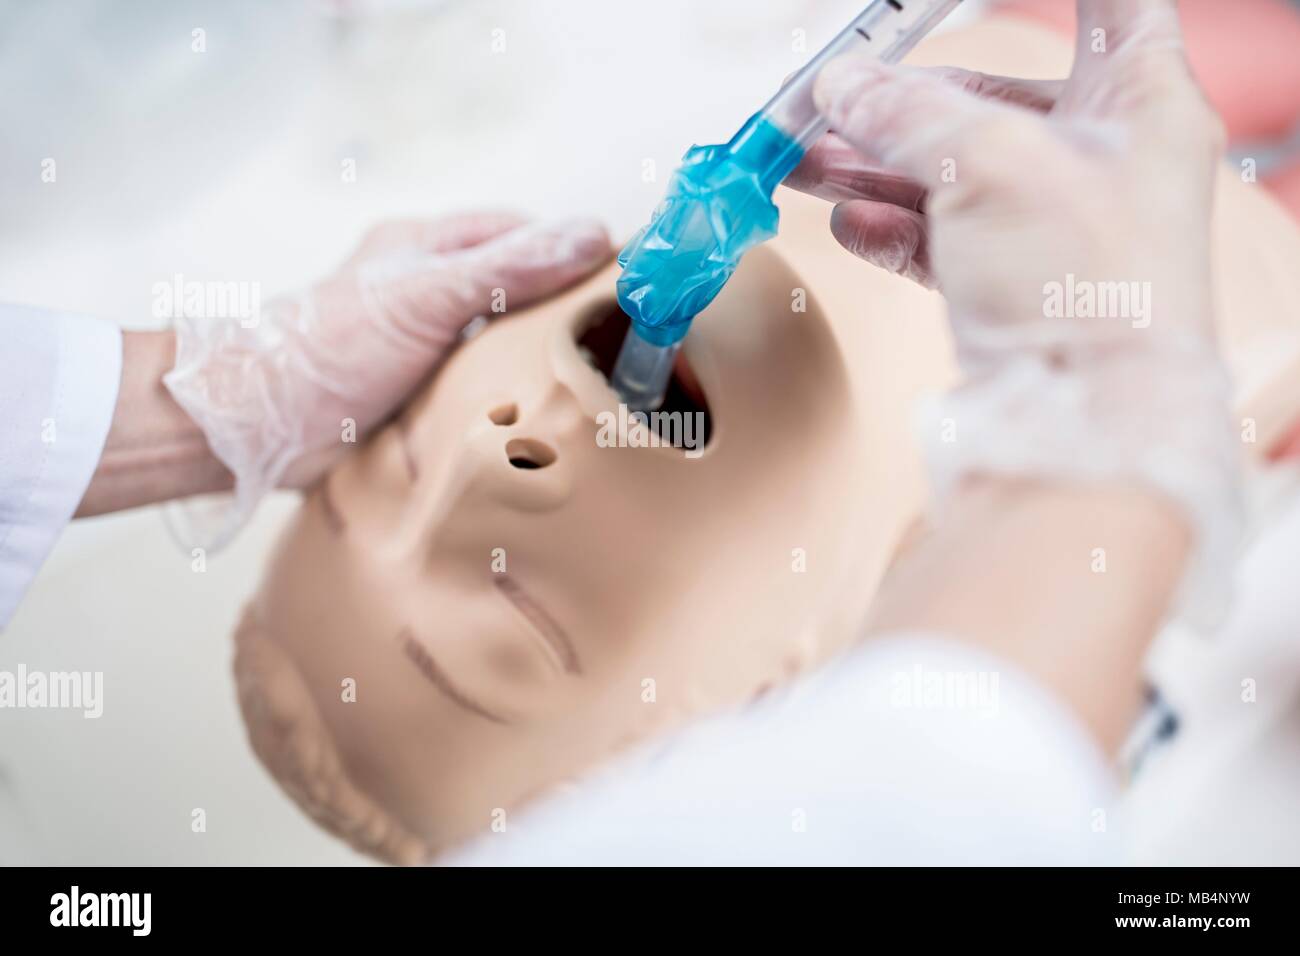 Doctor practising tracheal intubation on a training dummy. Stock Photo